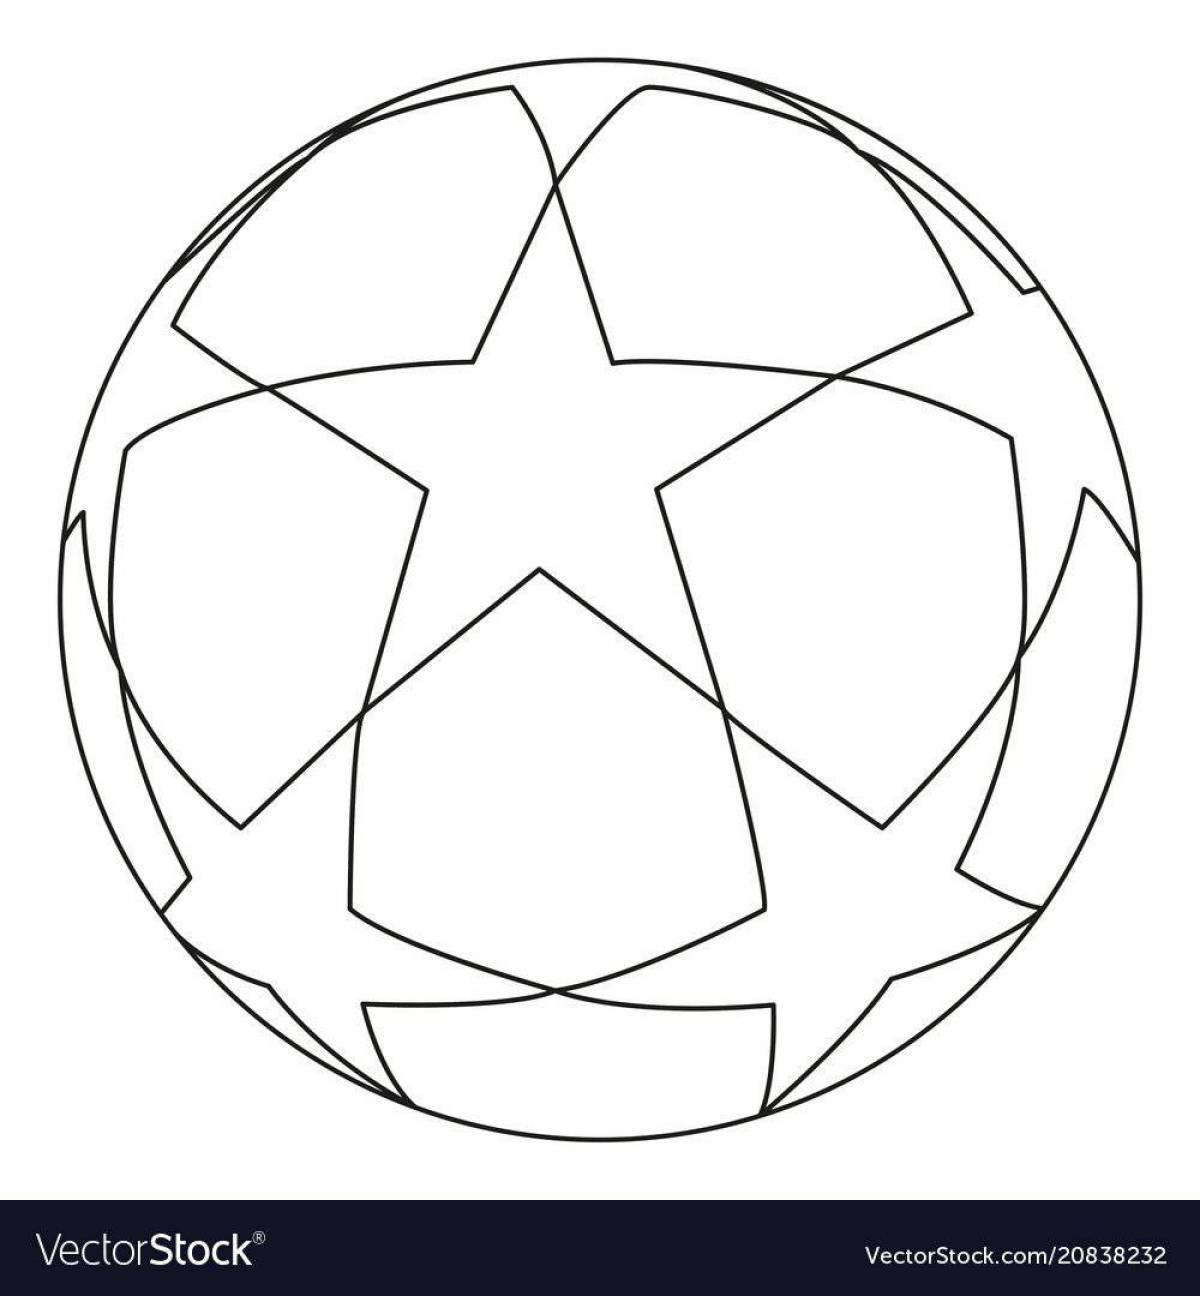 Fabulous soccer ball coloring page